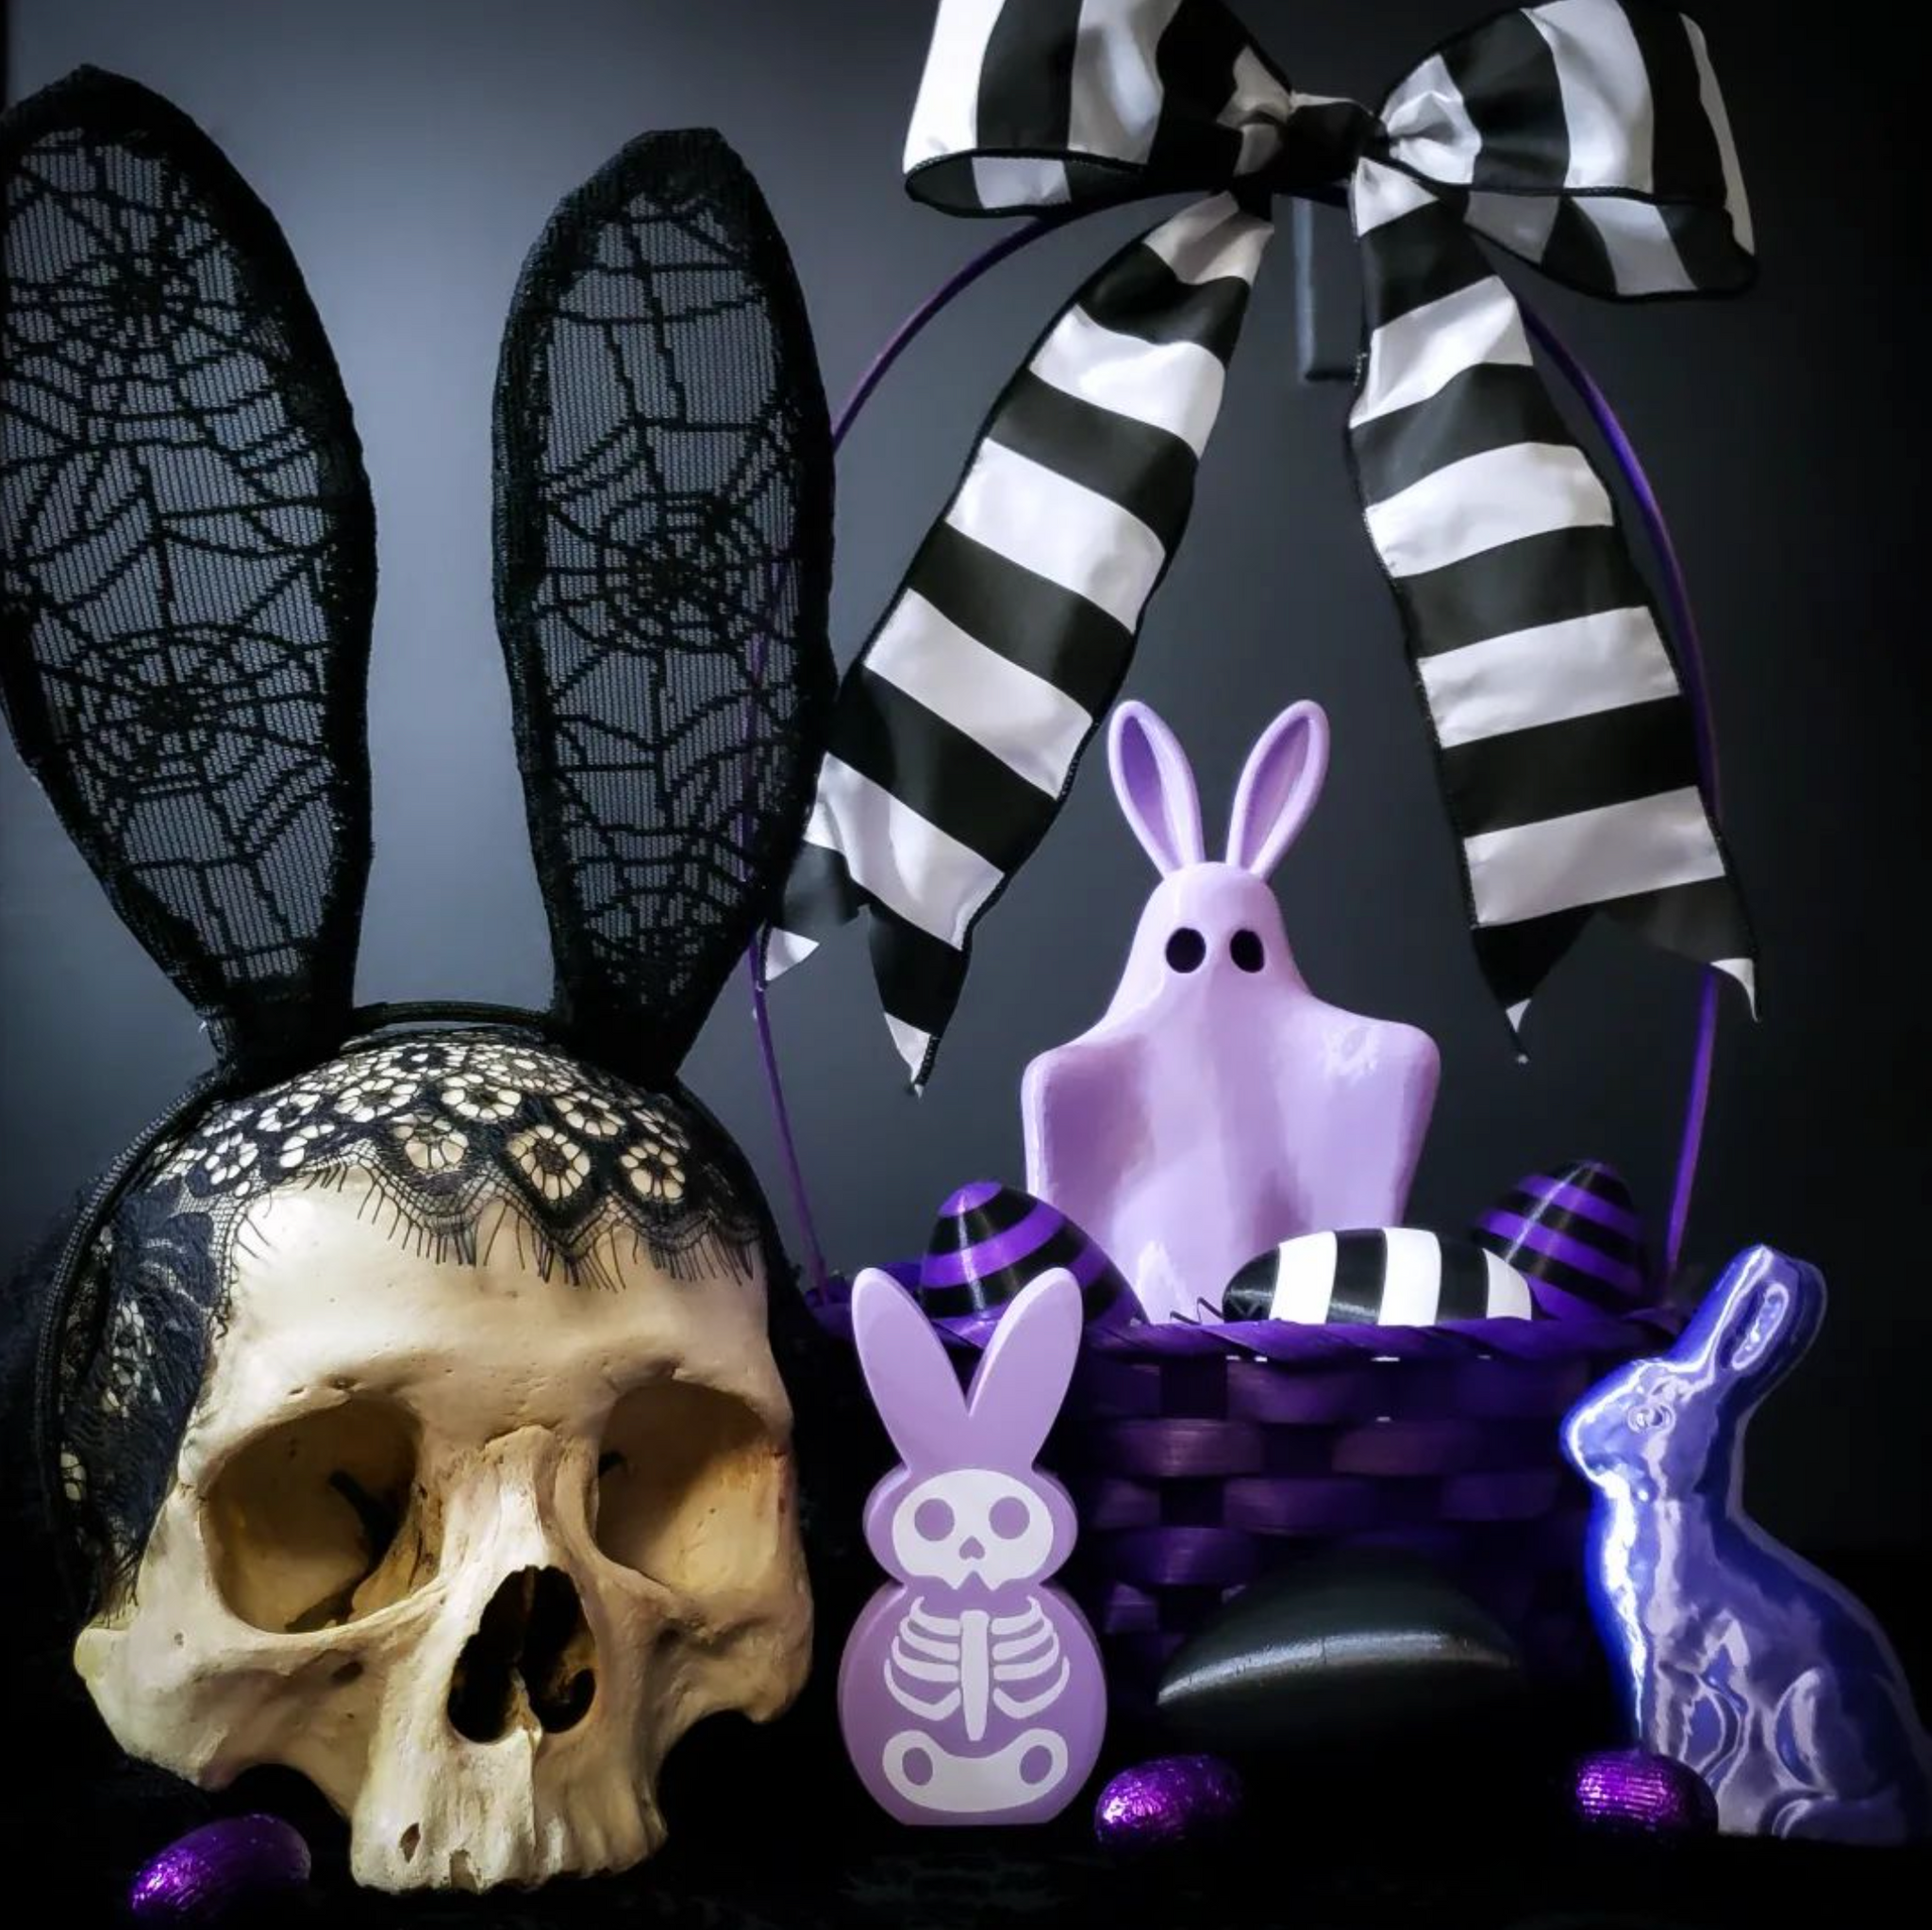 A spooky easter, easterween, easter-ween, easter ween, halloween easter table decorations of a skull wearing black lace bunny ears a purple spooky peep figure, shiny purple bunny decoration, black and purple easter basket with beetlejuice striped eggs and a black and white stripe bow.